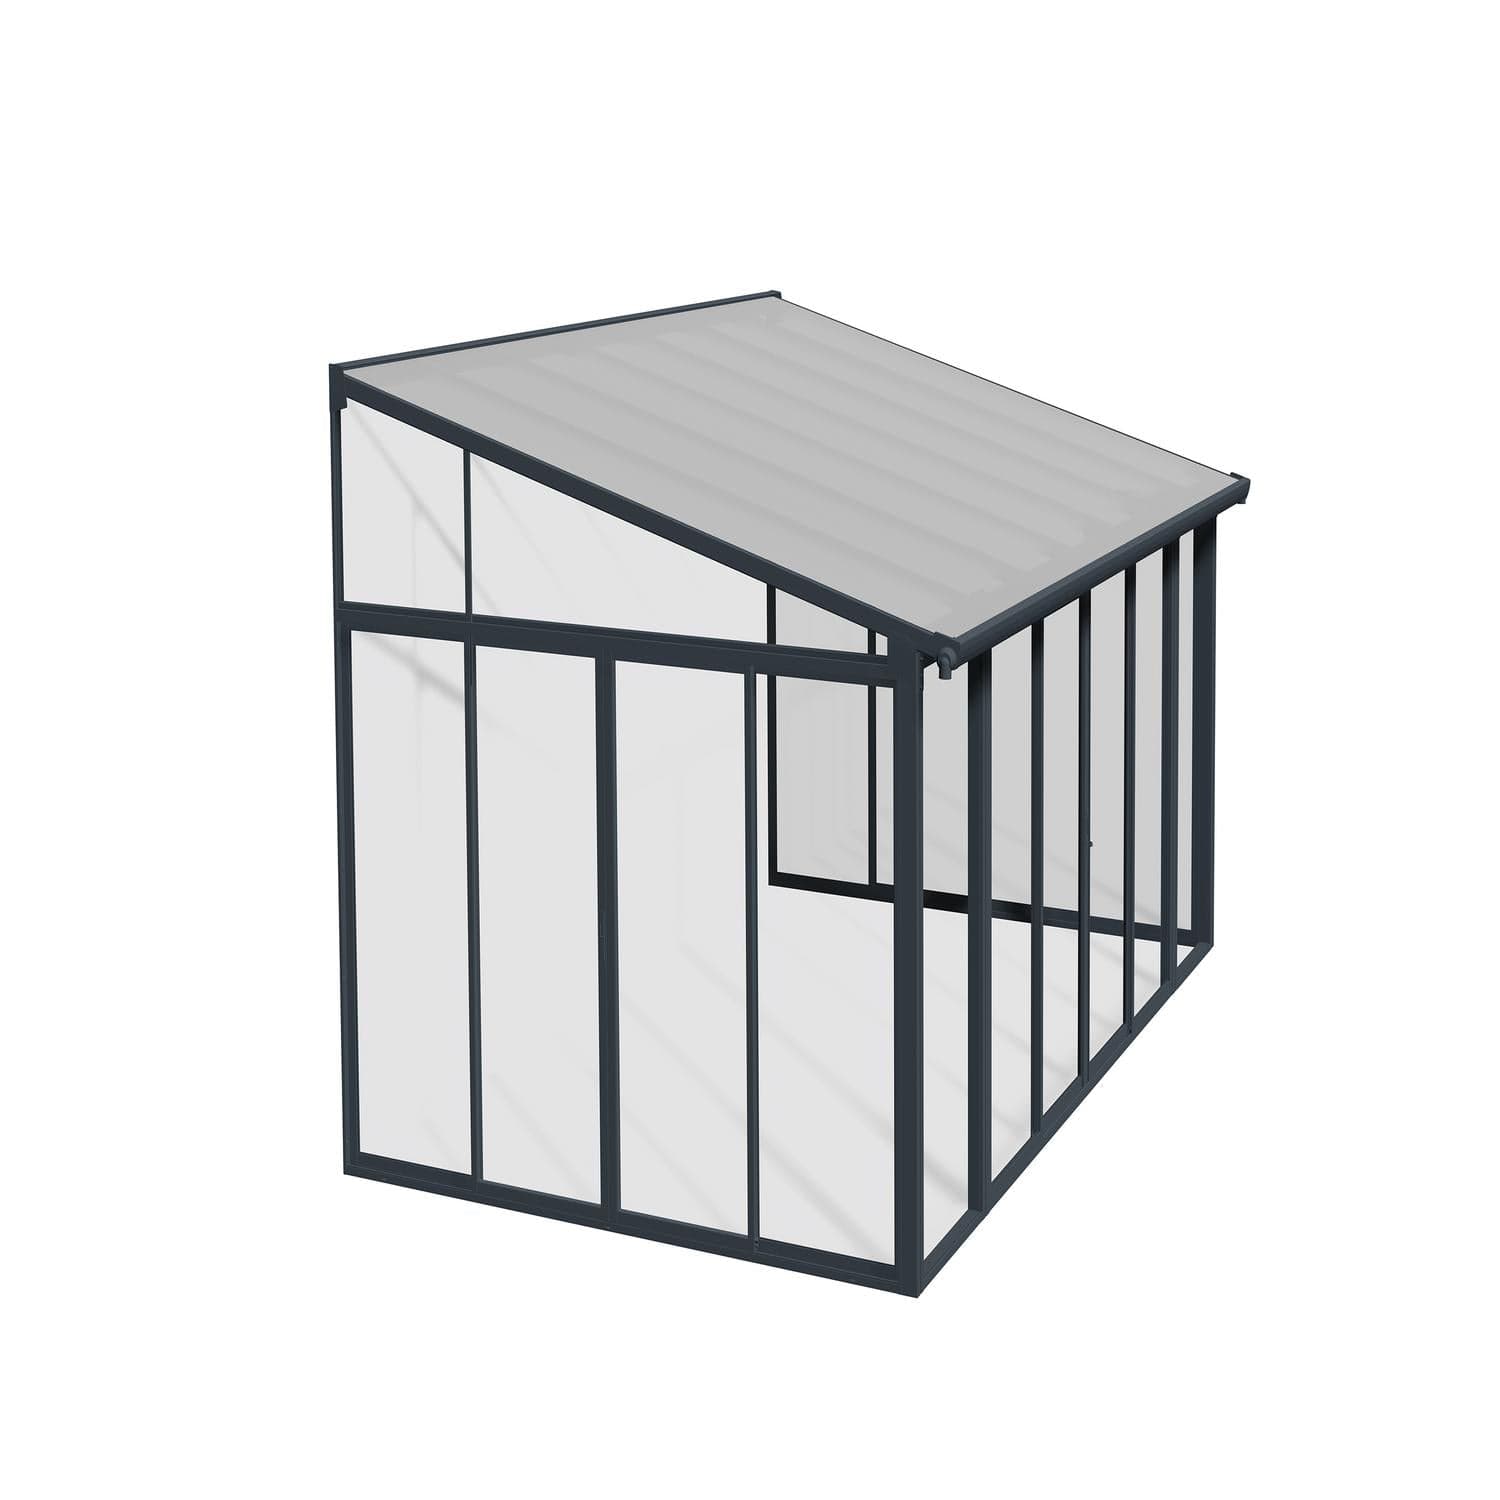 Palram - Canopia Add-a-Room Palram - Canopia | SanRemo 10x14 ft Patio Enclosure - Gray/Clear HG9064